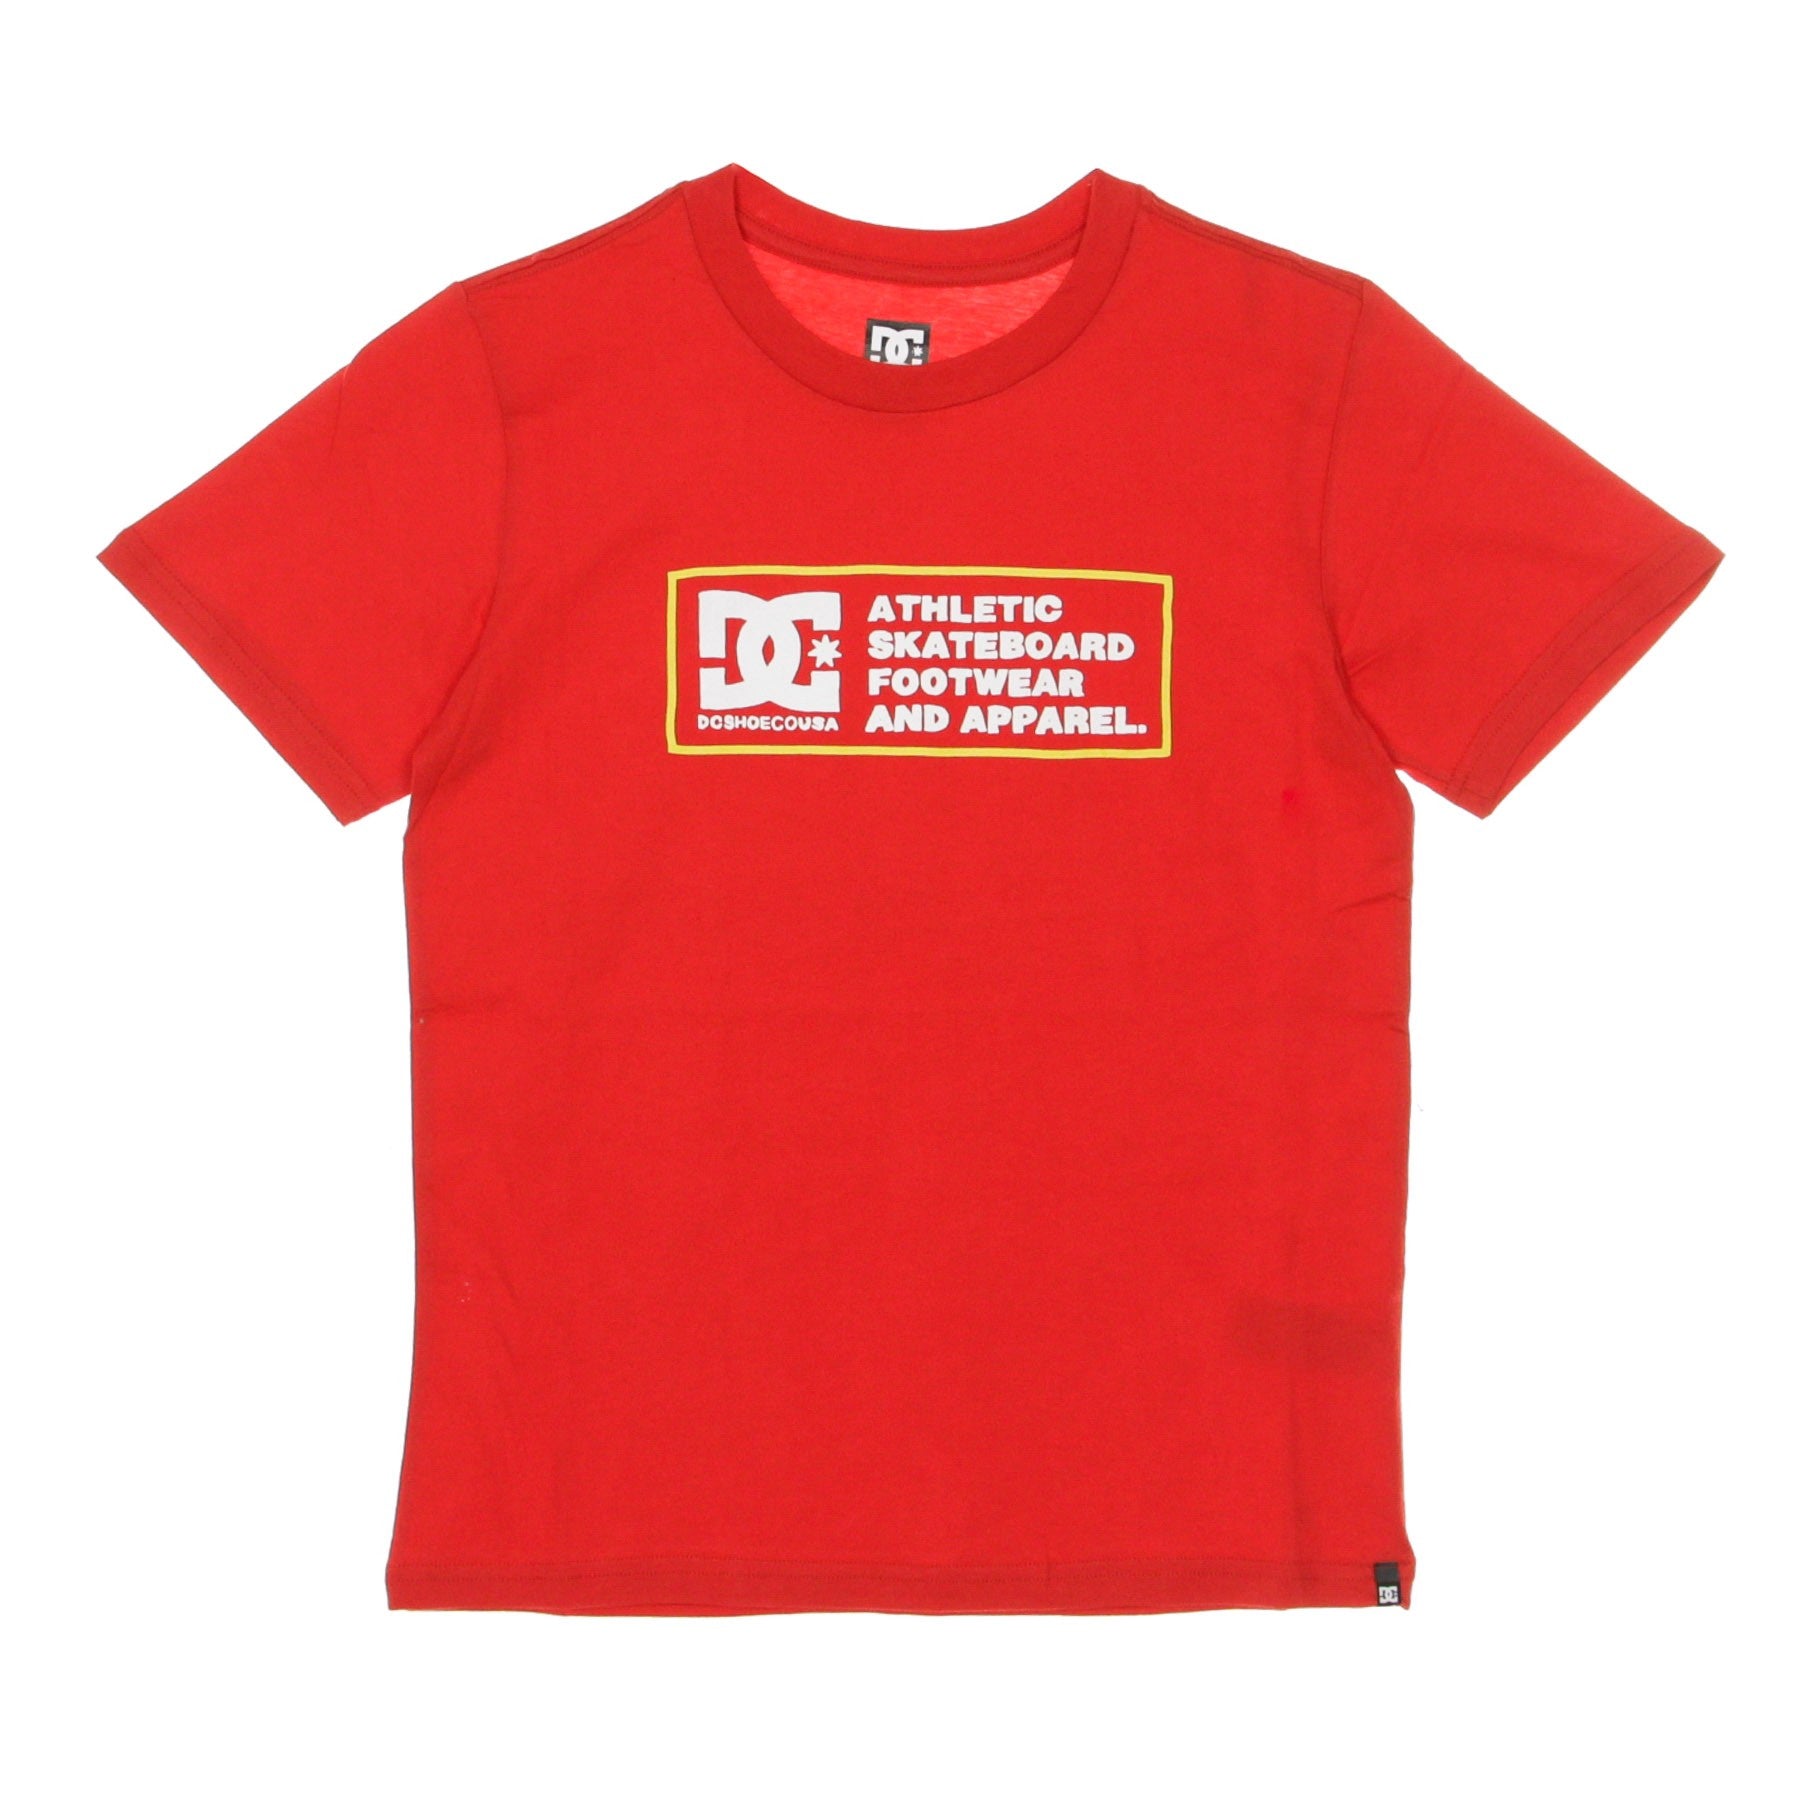 Sketchy Zone Racing Red Child T-Shirt